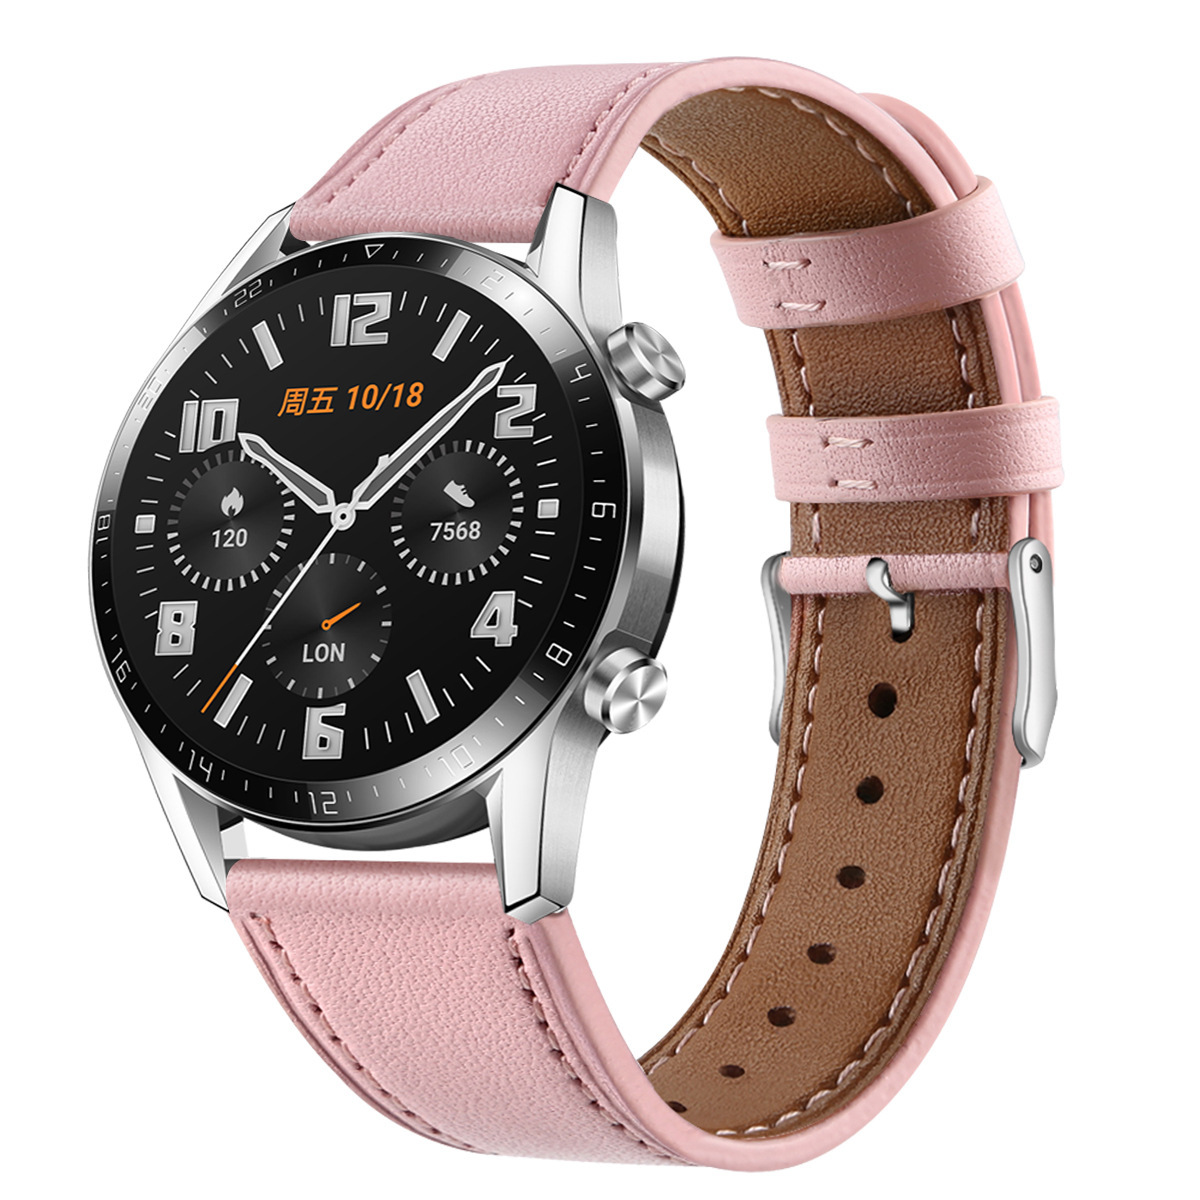 Bakeey-22mm-Replacement-Strap-Genuine-Leather-Smart-Watch-Band-For-Huawei-WATCH-GTGT2-46MM-1656574-3